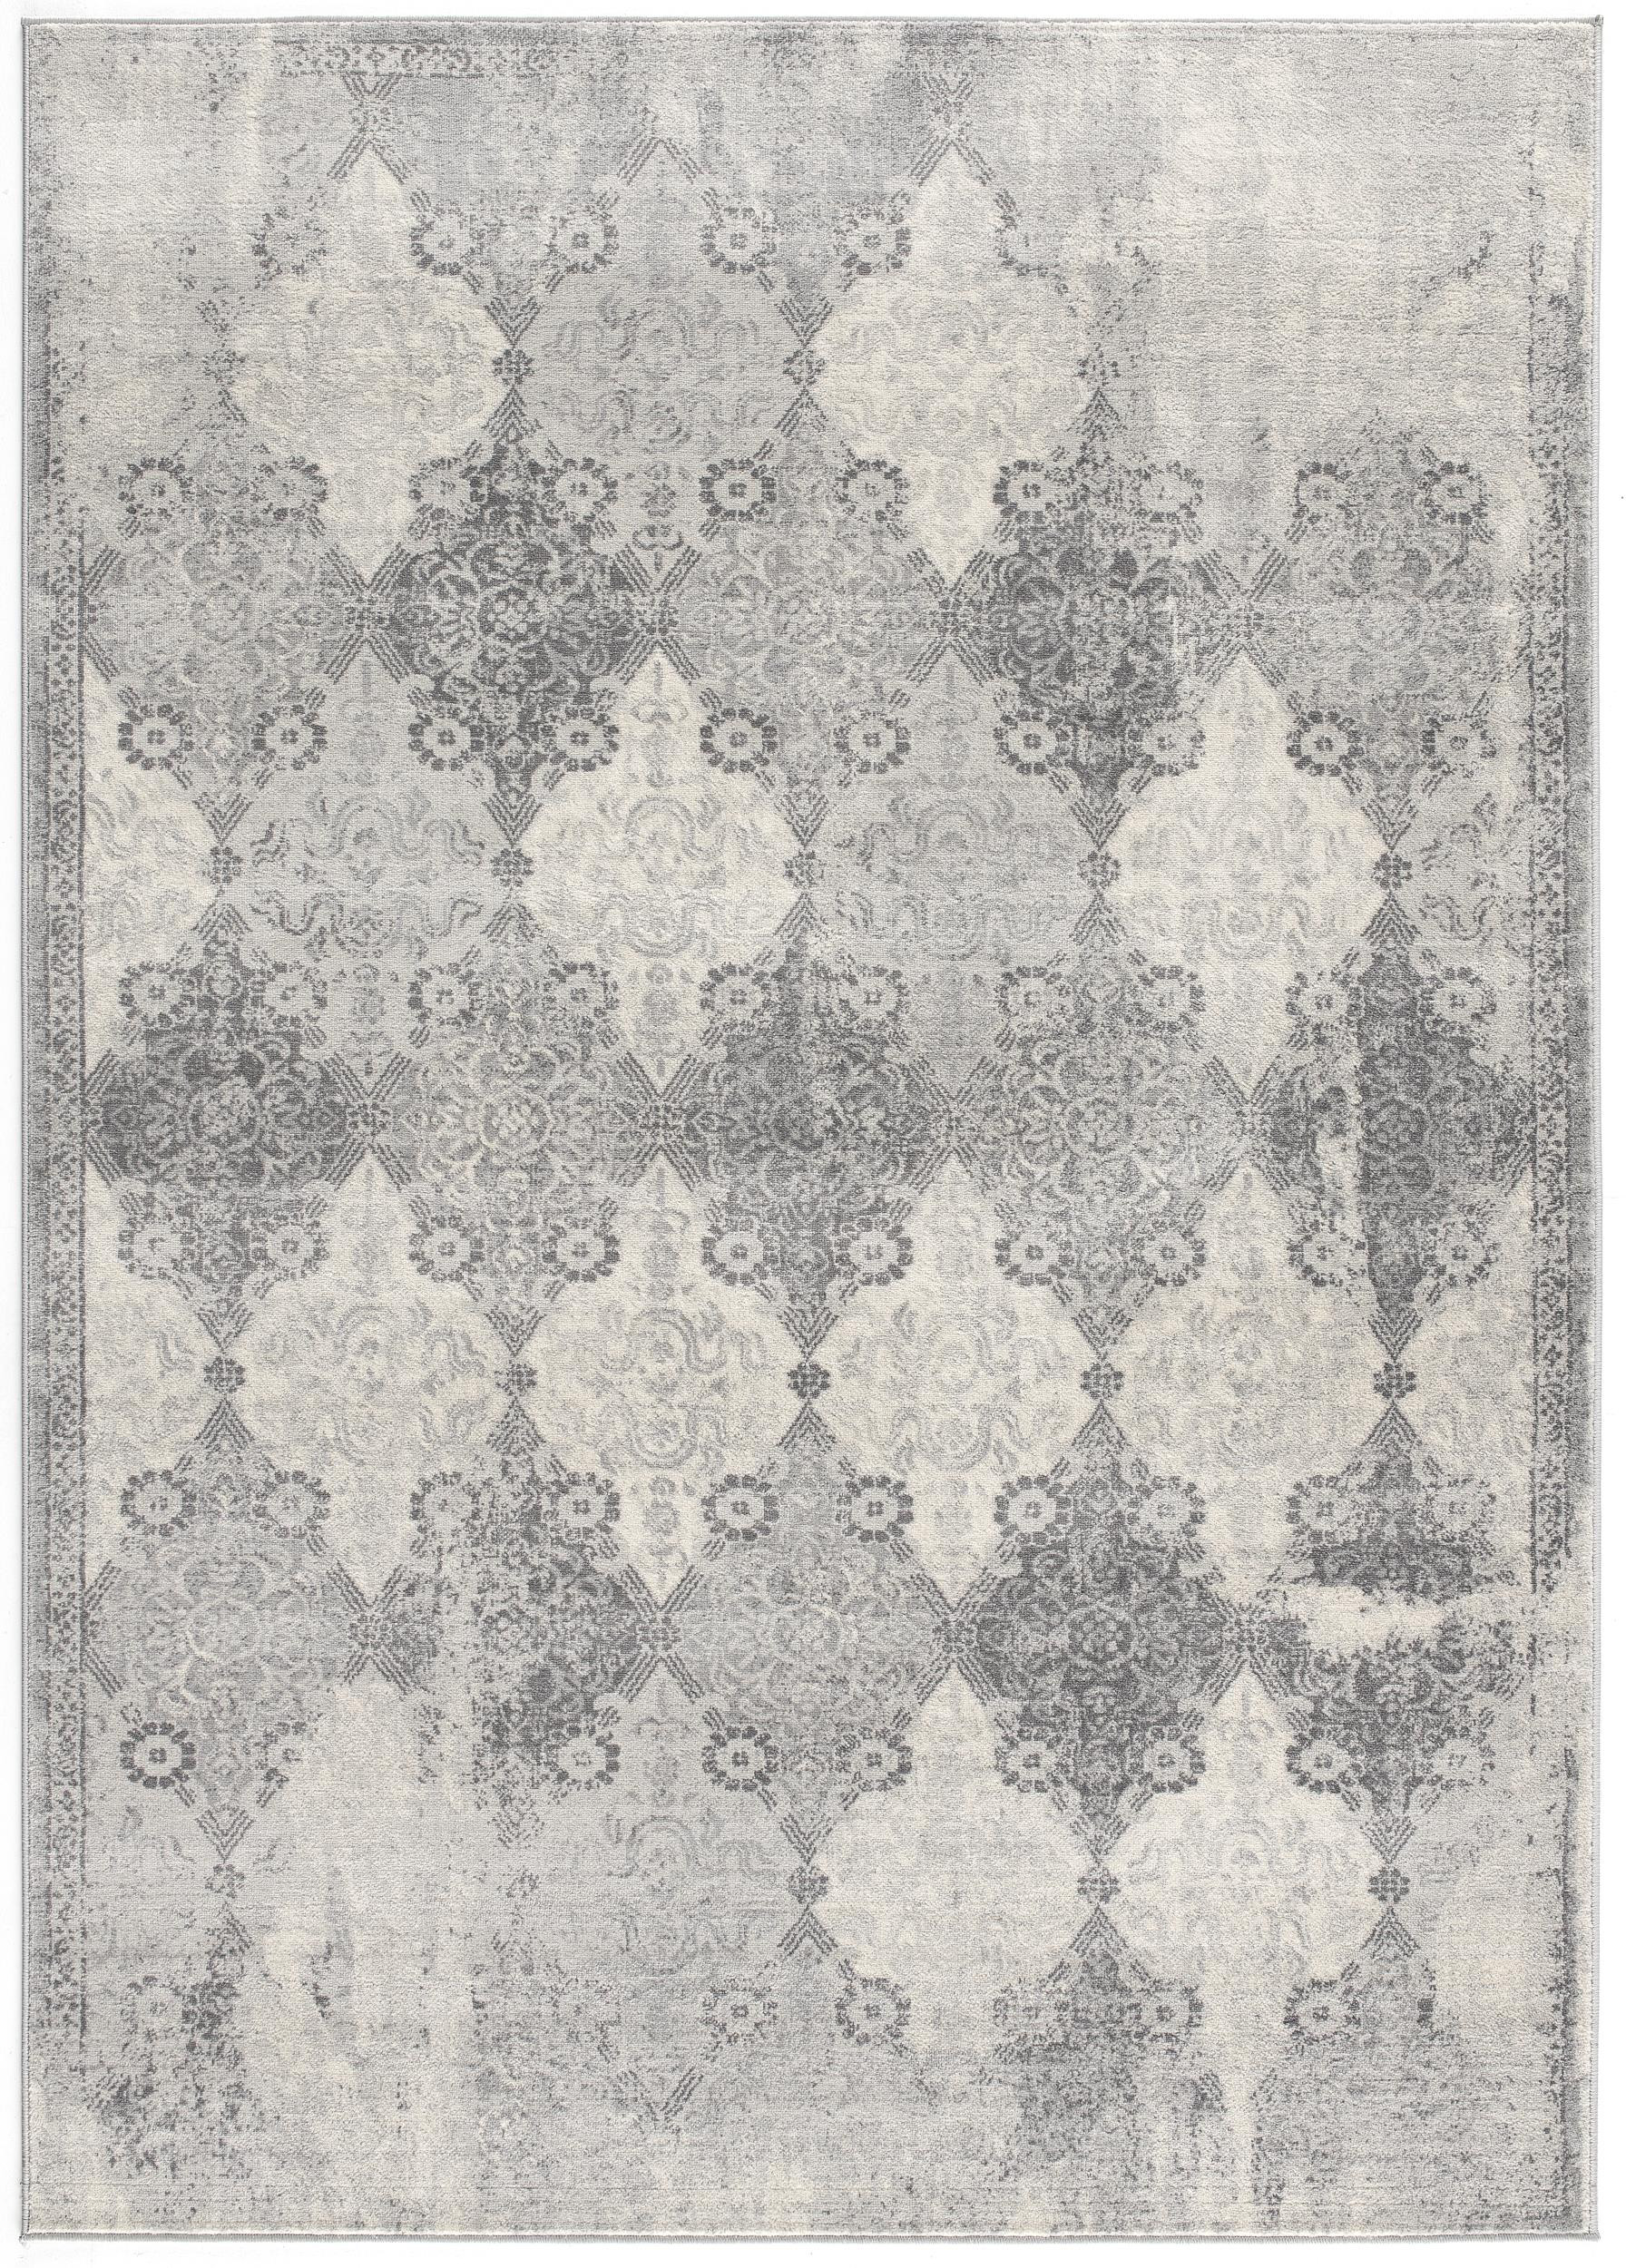 2’ X 3’ Gray Distressed Trellis Pattern Scatter Rug-390204-1